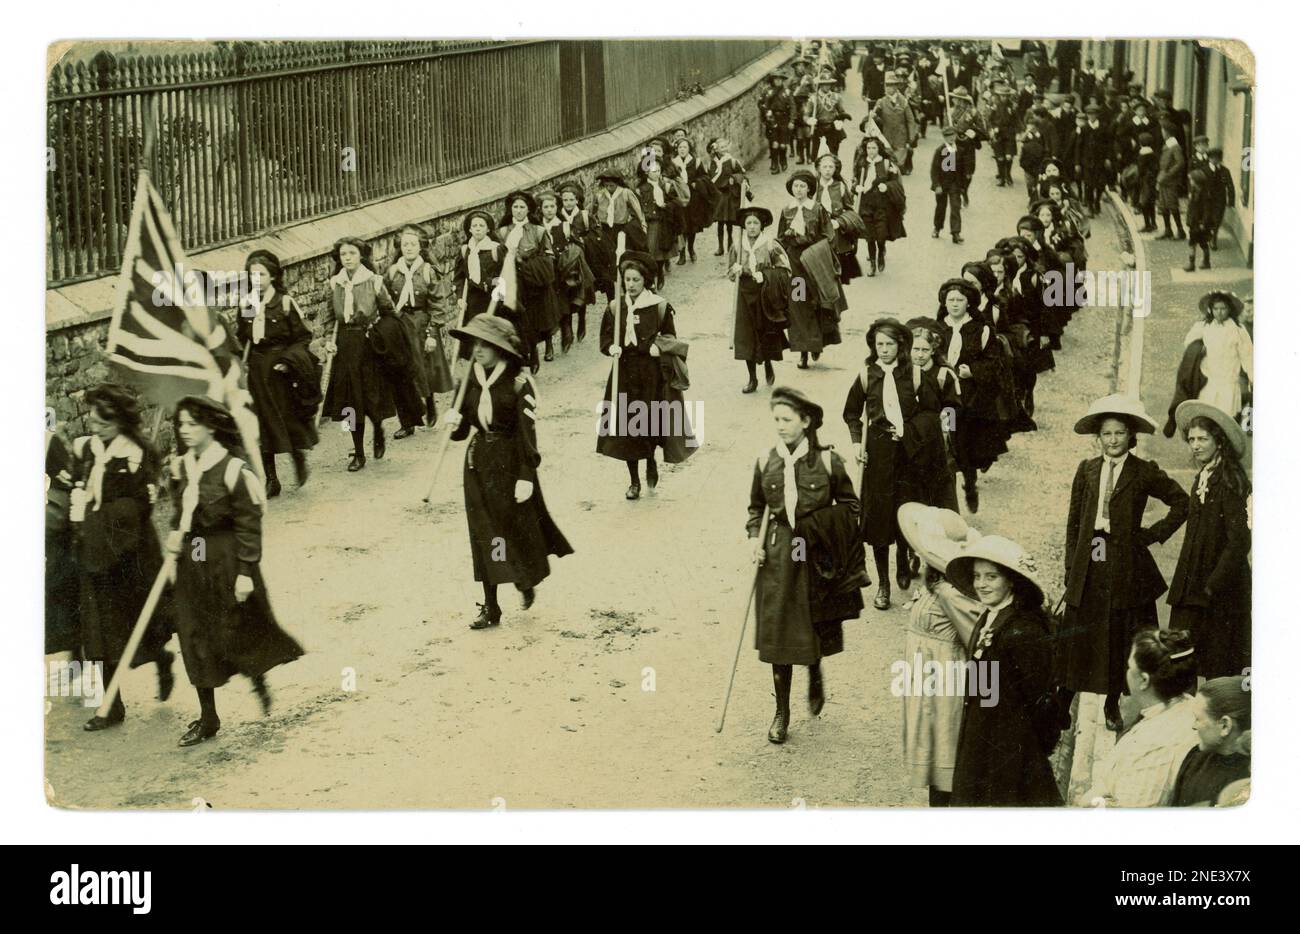 Original patriotic troops of girl guides and boy scouts parading through a town, marching with a Union Jack flag, public scouting rally, some of the onlookers are wearing a lapel ribbon, circa 1912, U.K. Stock Photo